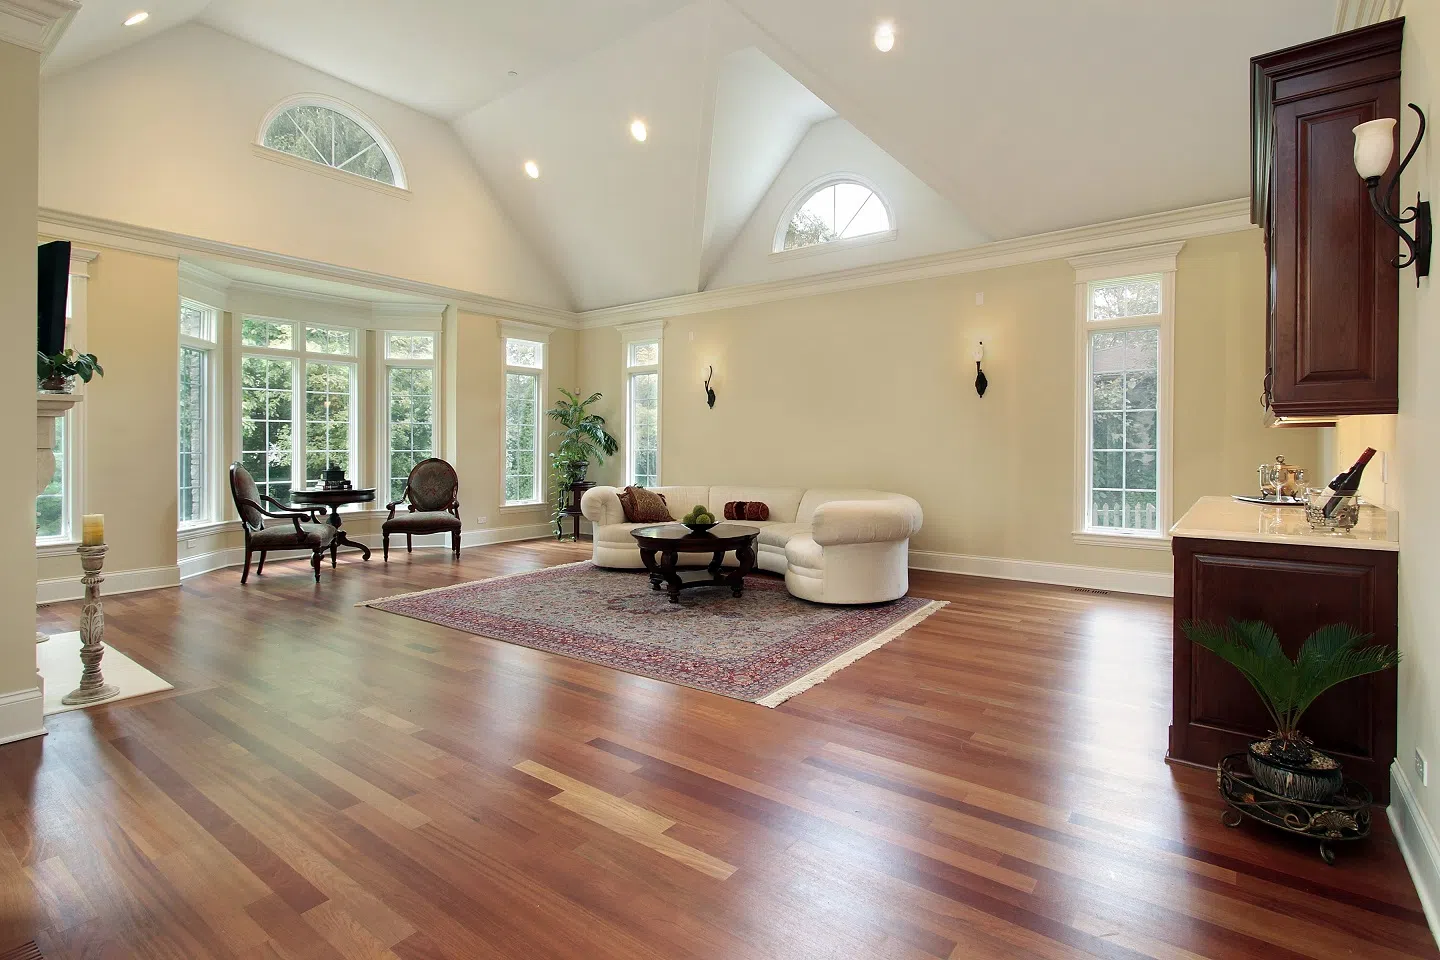 What You Need to Know About Cherry Wood Flooring